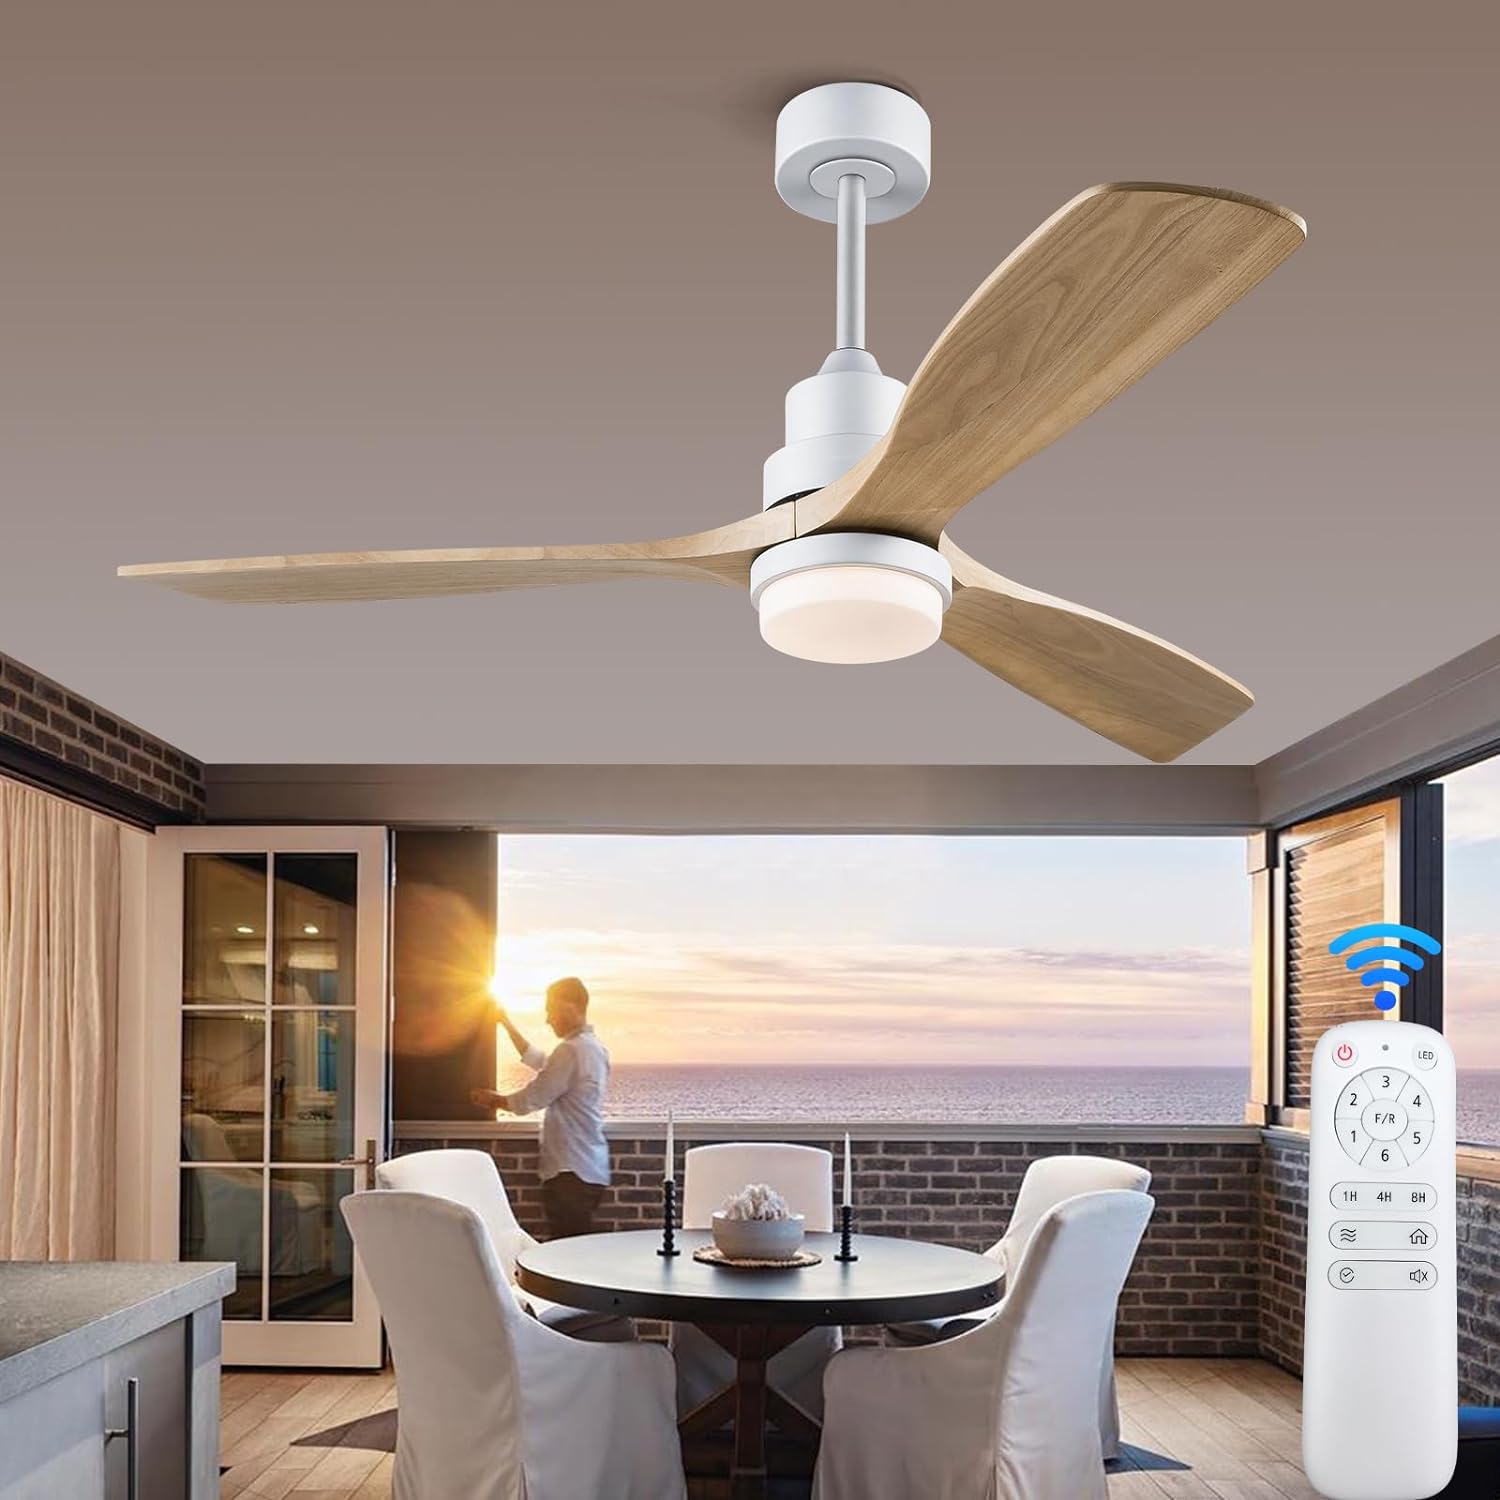 The design of this fan is not only functional but also aesthetically pleasing. The wood finish adds a touch of elegance to my spaces, making them feel cozy and inviting. The 52 size is perfect for our master room which is pretty big, providing excellent air circulation.The inclusion of both lights and a remote control is a significant convenience. The lights offer ample illumination, and the remote control allows me to adjust the fan speed, light intensity.The fan' performance is impressive. I